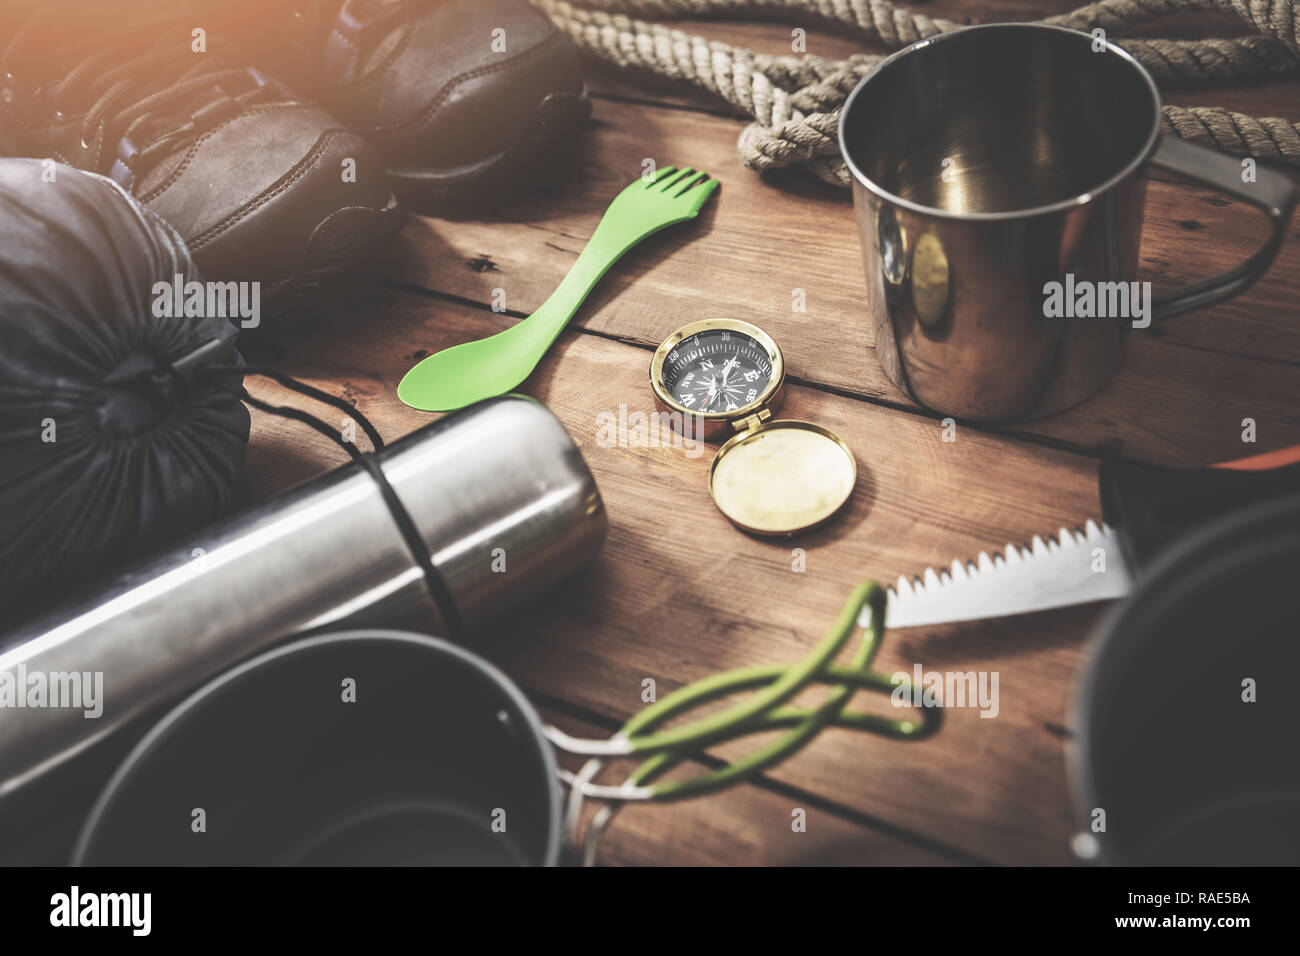 time for adventures - set of expedition camping equipment Stock Photo